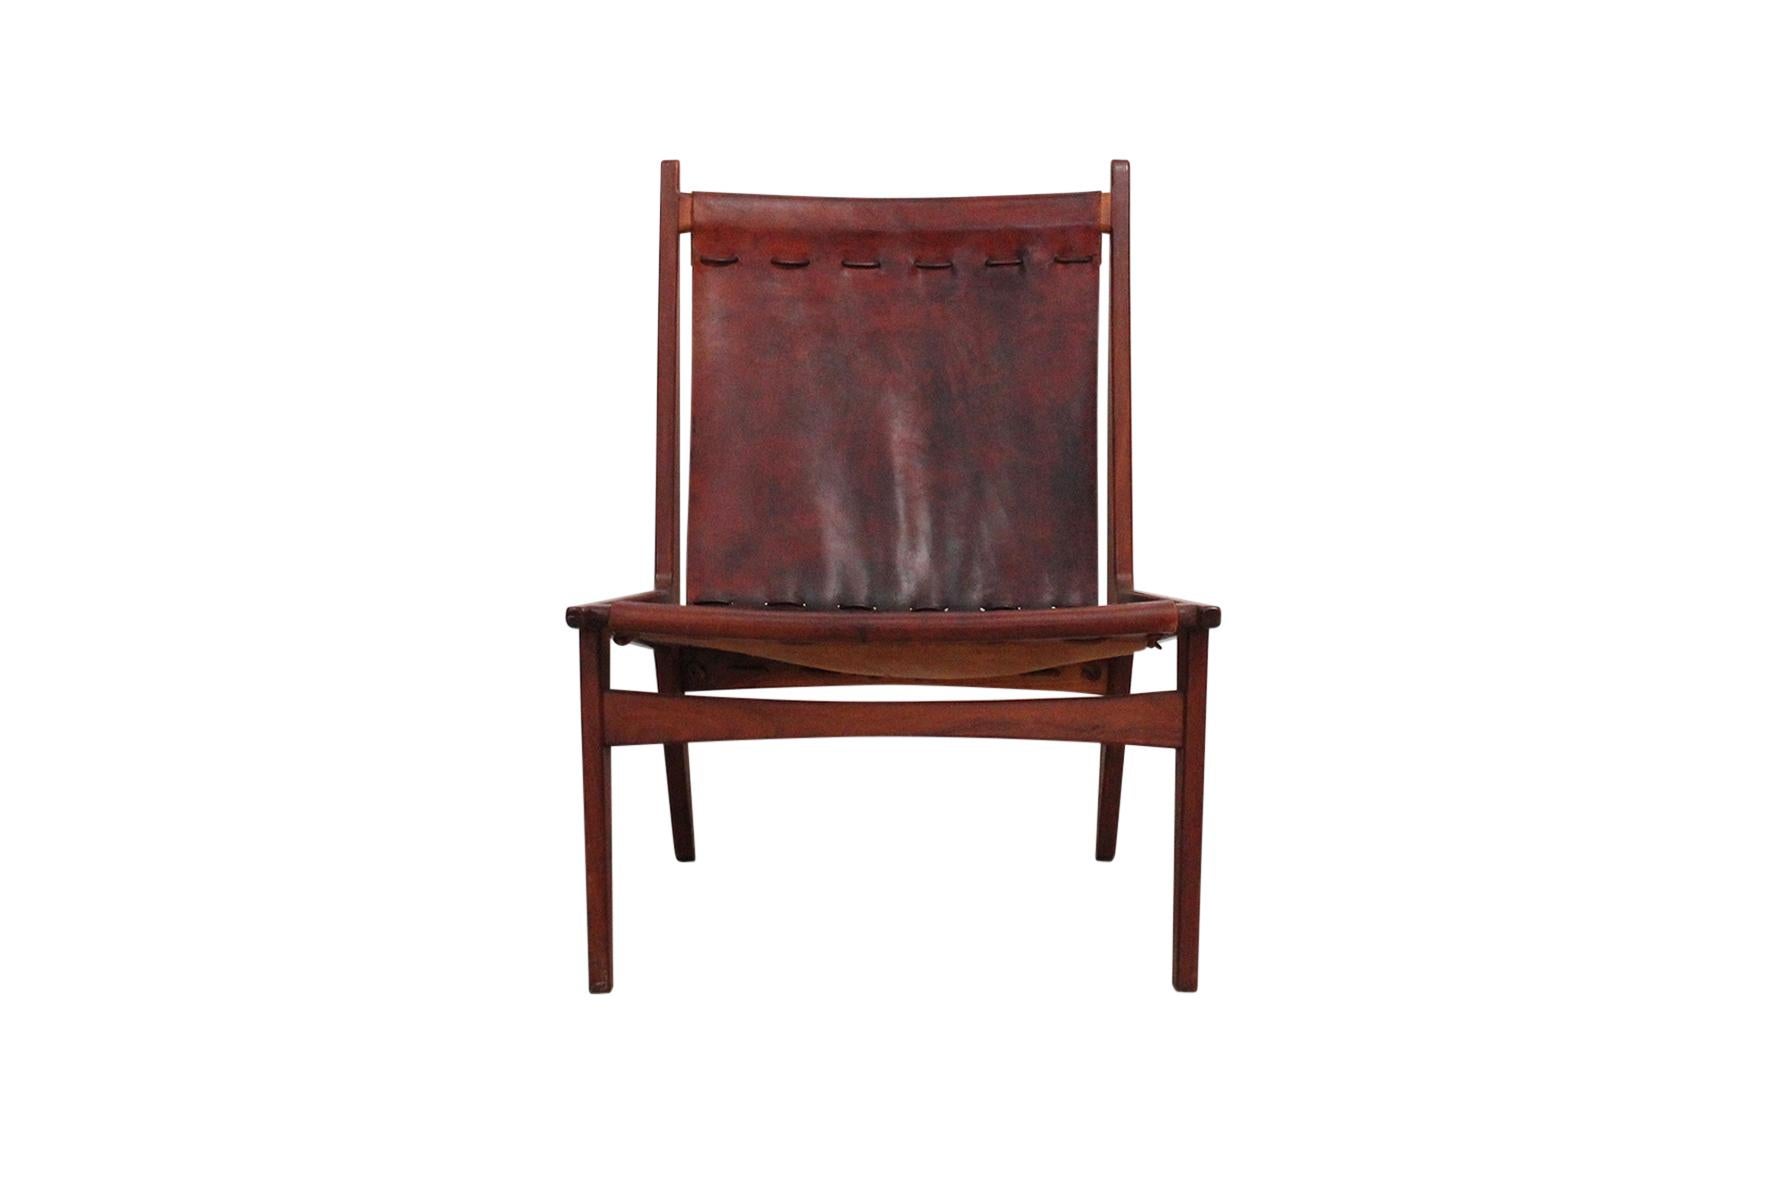 Leather sling and walnut lounge chair designed by New Hampshire craftsman Walker Weed. In 1964, he was selected as Director of the Crafts Program in the Hopkins Center at Dartmouth College. He mentored many students in the art of working with wood